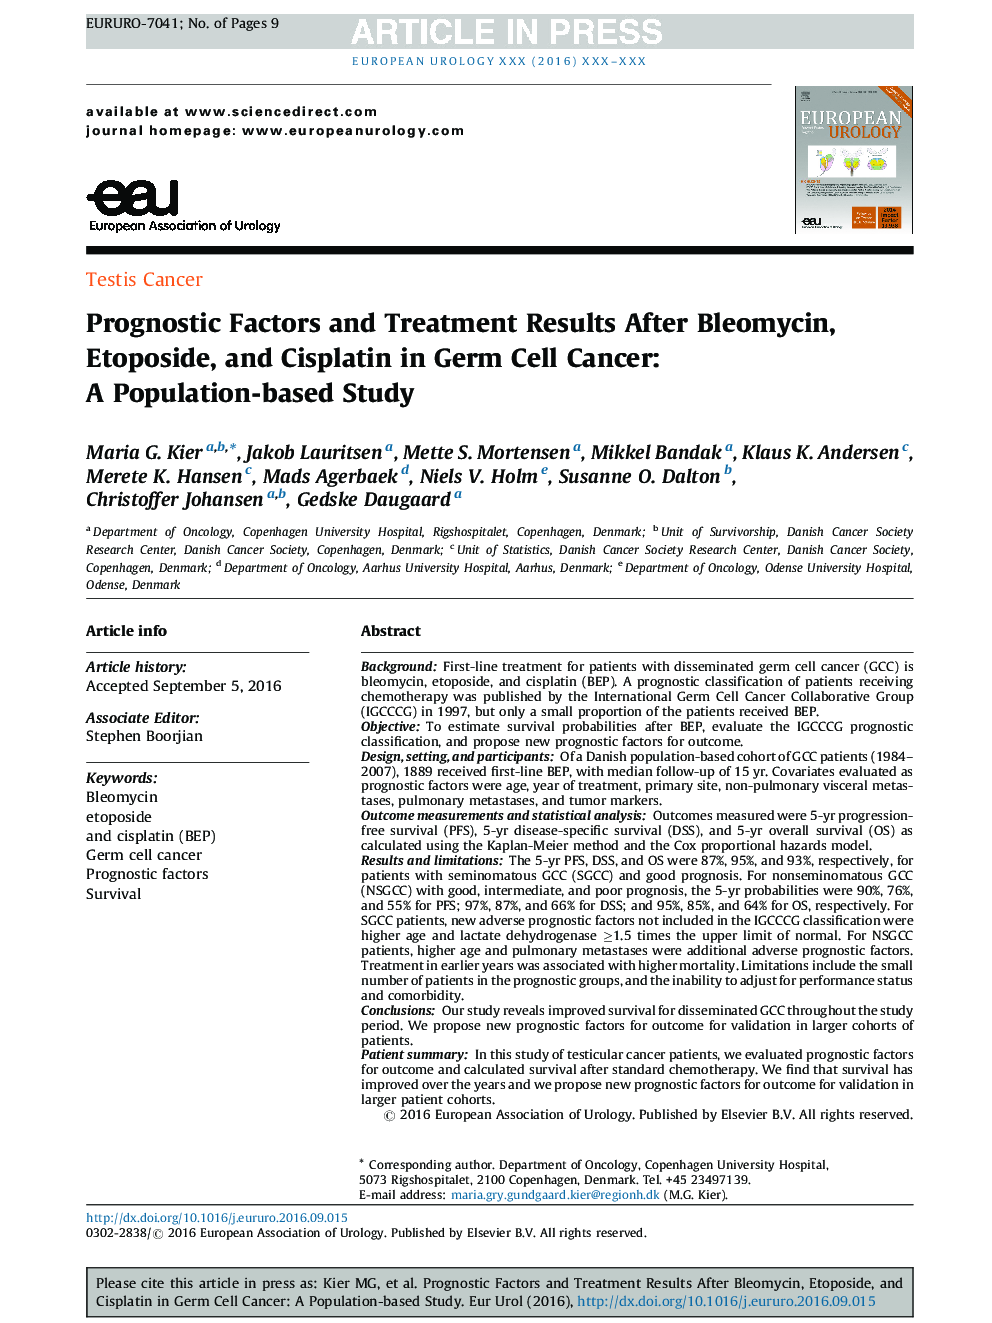 Prognostic Factors and Treatment Results After Bleomycin, Etoposide, and Cisplatin in Germ Cell Cancer: A Population-based Study